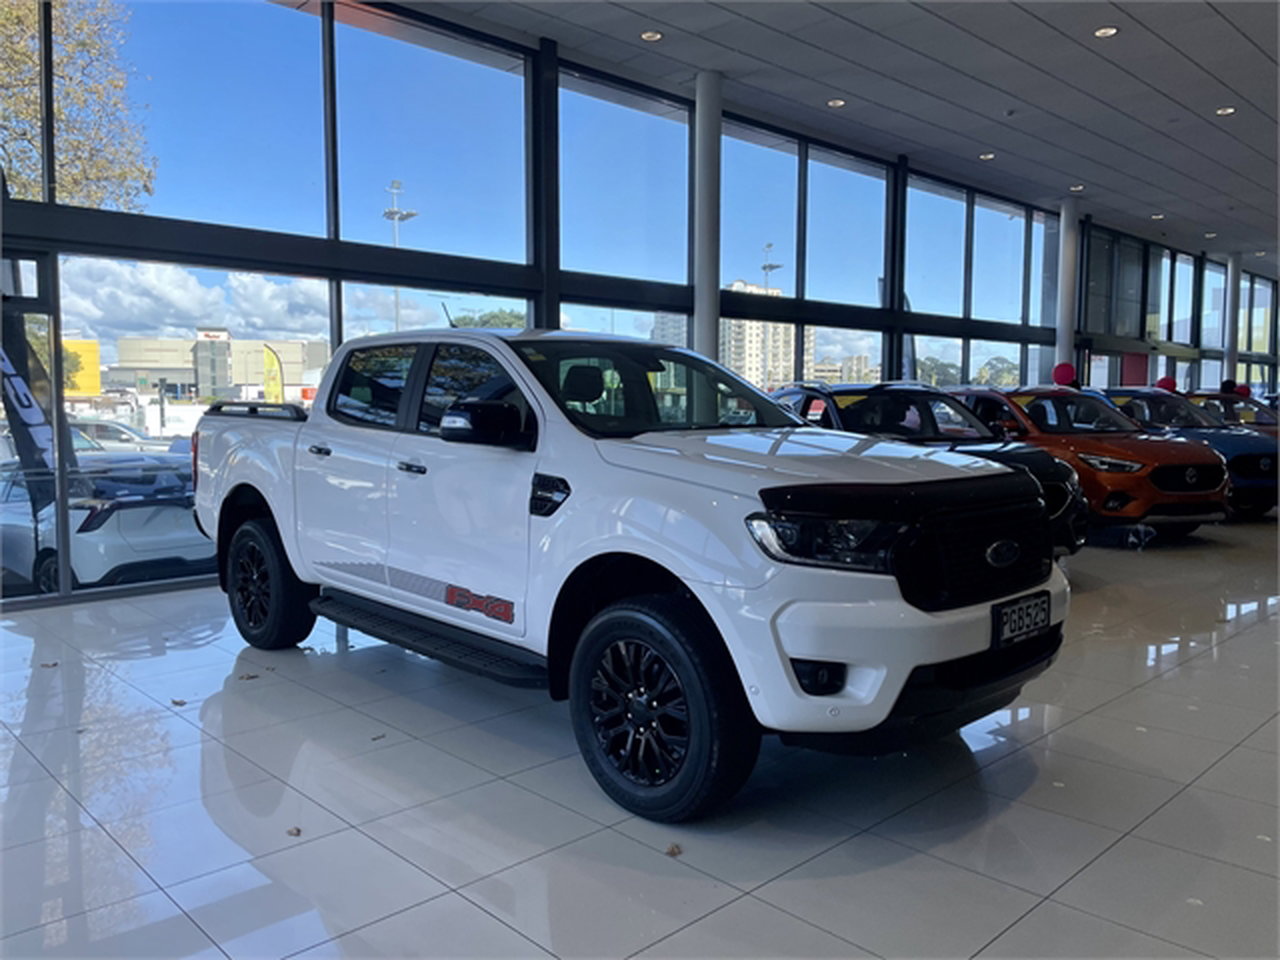 2022 Ford Ranger Fx4 Double Cab